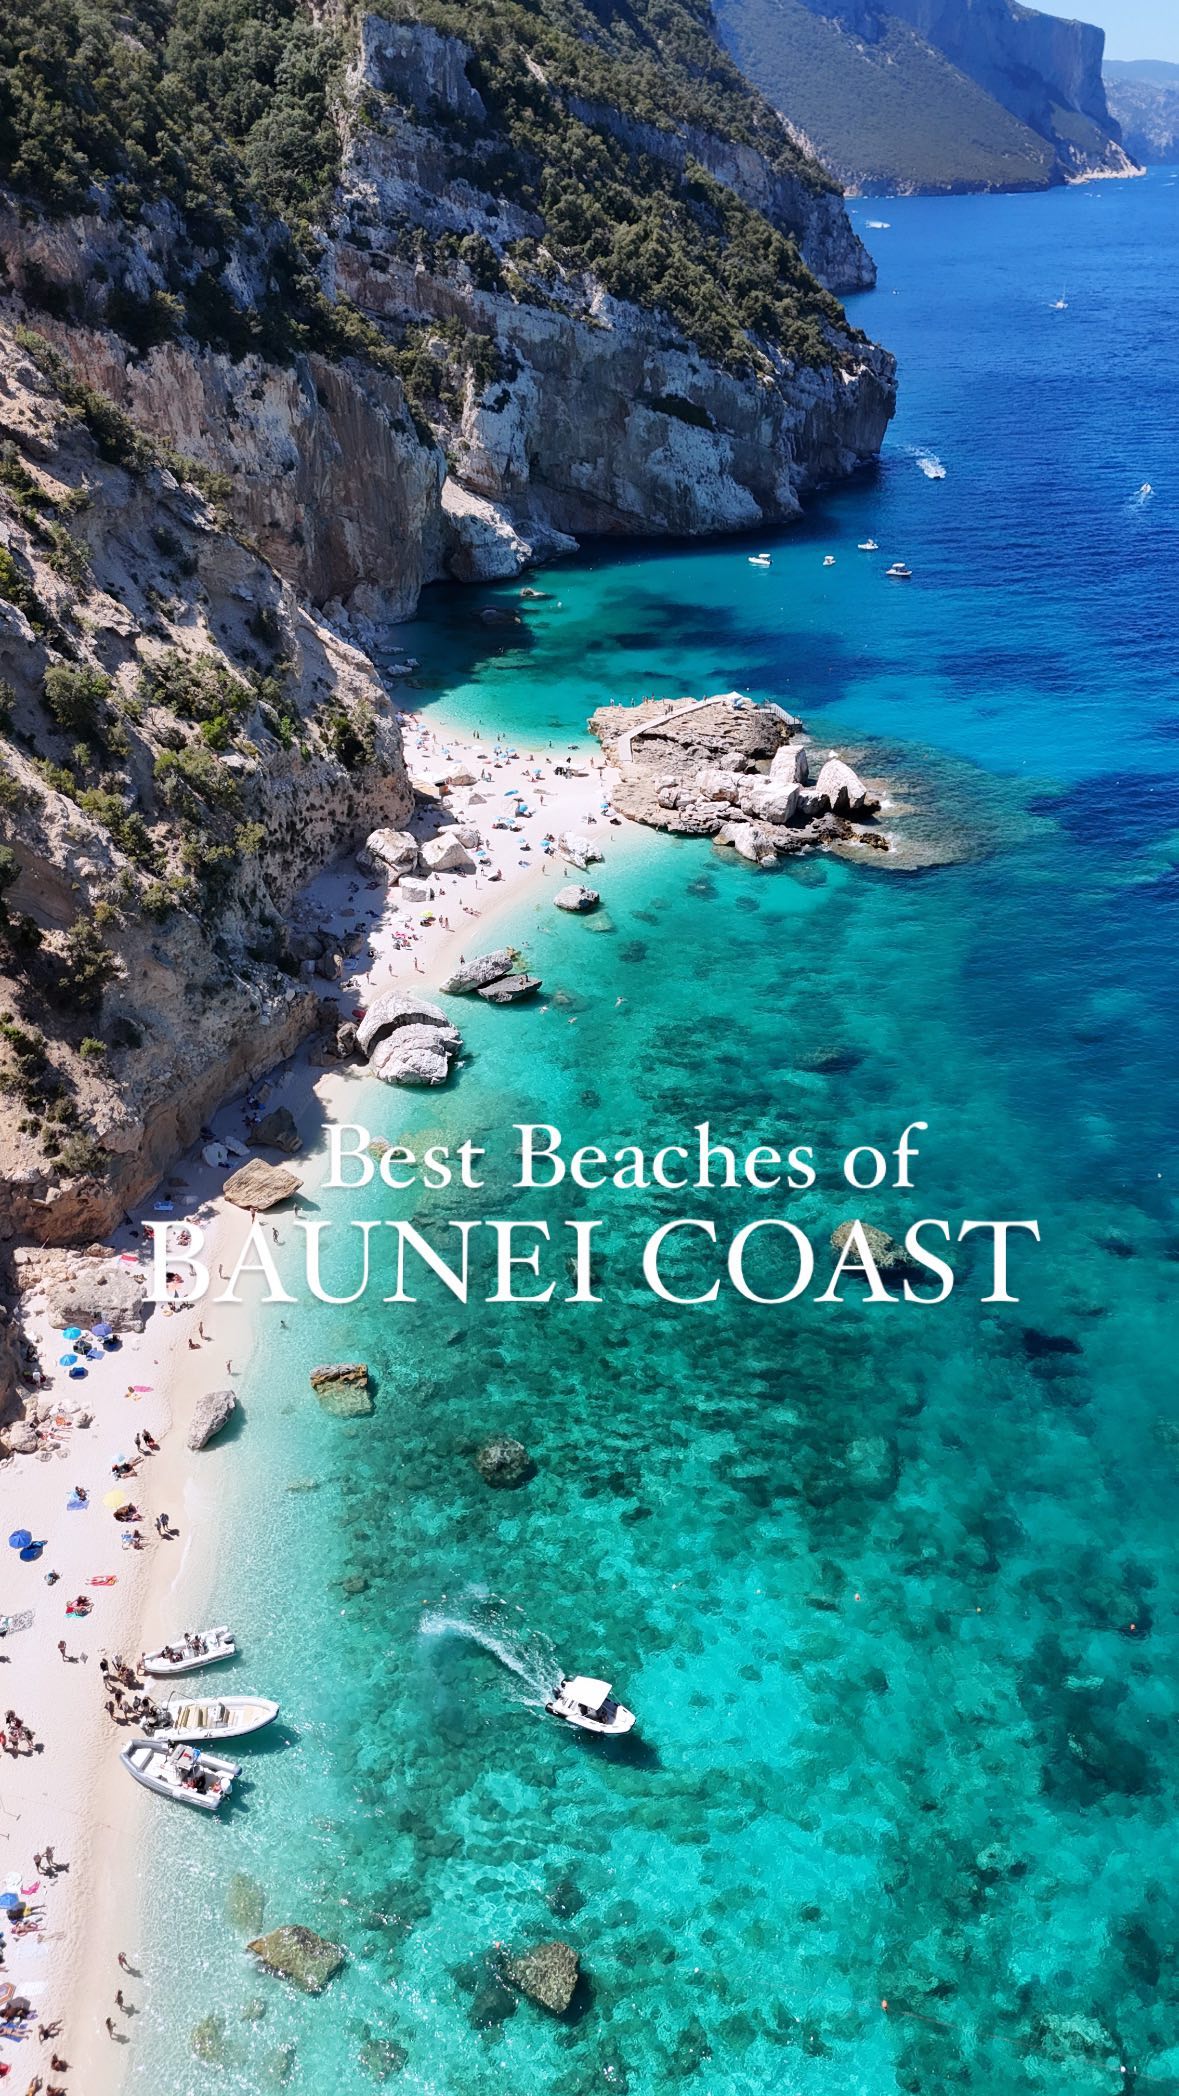 The Baunei Coast is what initially caught my attention and made me decide to travel solo to Sardinia last year, and hopefully this video explains why I wanted to go here!

These beautiful beaches and coves are only accessible by boat (or strenuous hike), which I would recommend booking far in advance with @getyourguide especially in the summer months! Be sure to pick the tours that specifically say they take you ON to the beaches, as some are not allowed to!

BTW two of these beaches are on this year’s Top 50 Beaches in the World! Cala Mariolu, and Cala Goloritzè, however Goloritzè is not accessible by boat! You have to swim or hike there!

The exact tour and all of my tips for Baunei Coast and Sardinia are on my main profile! 

This trip was made possible through @getyourguidecommunity — if you’re a creator, check it out! 

Which of these beaches are your favorite??

#bauneicoast #sardinia #sardegna #mylifesatravelmovie x #getyourguide #calamariolu #calagolorizè #calagabbiano #calabriaila #bestbeaches #italiansummer #mylifeinsardinia